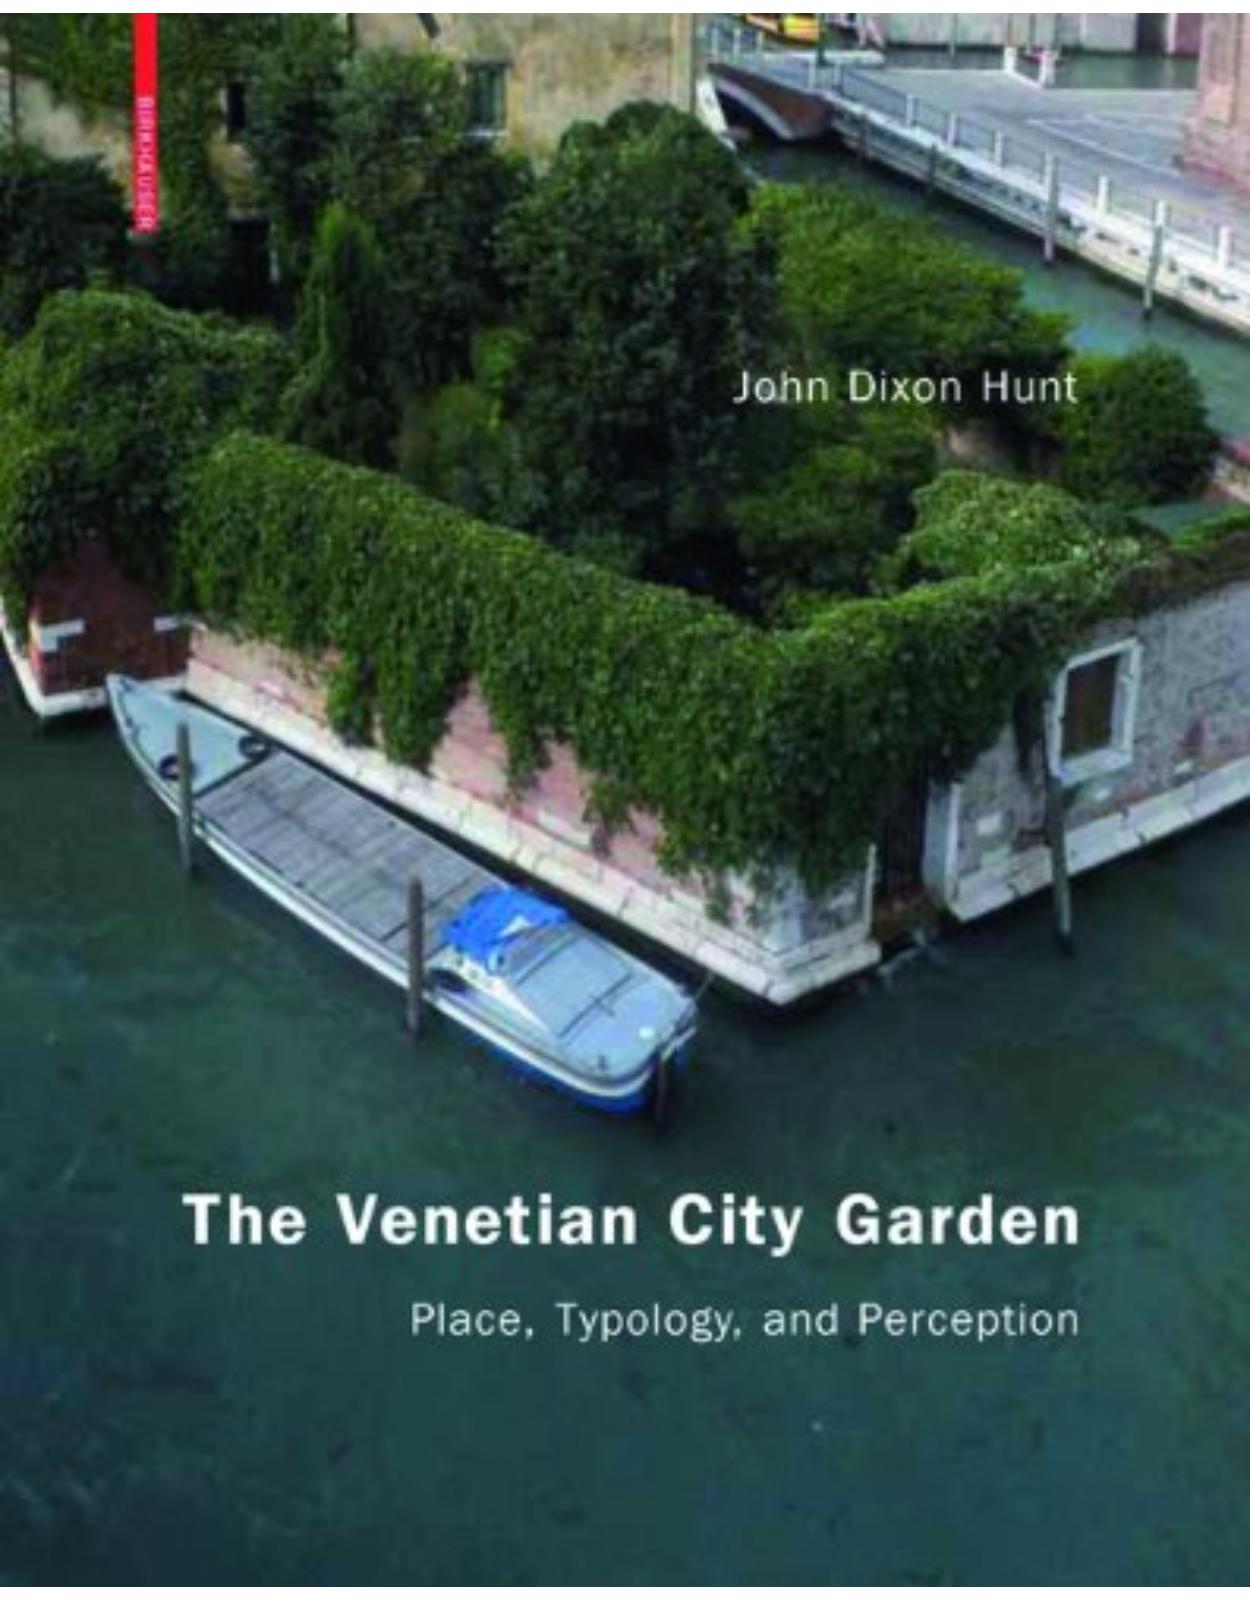 The Venetian City Garden: Place, Typologie, and Perception